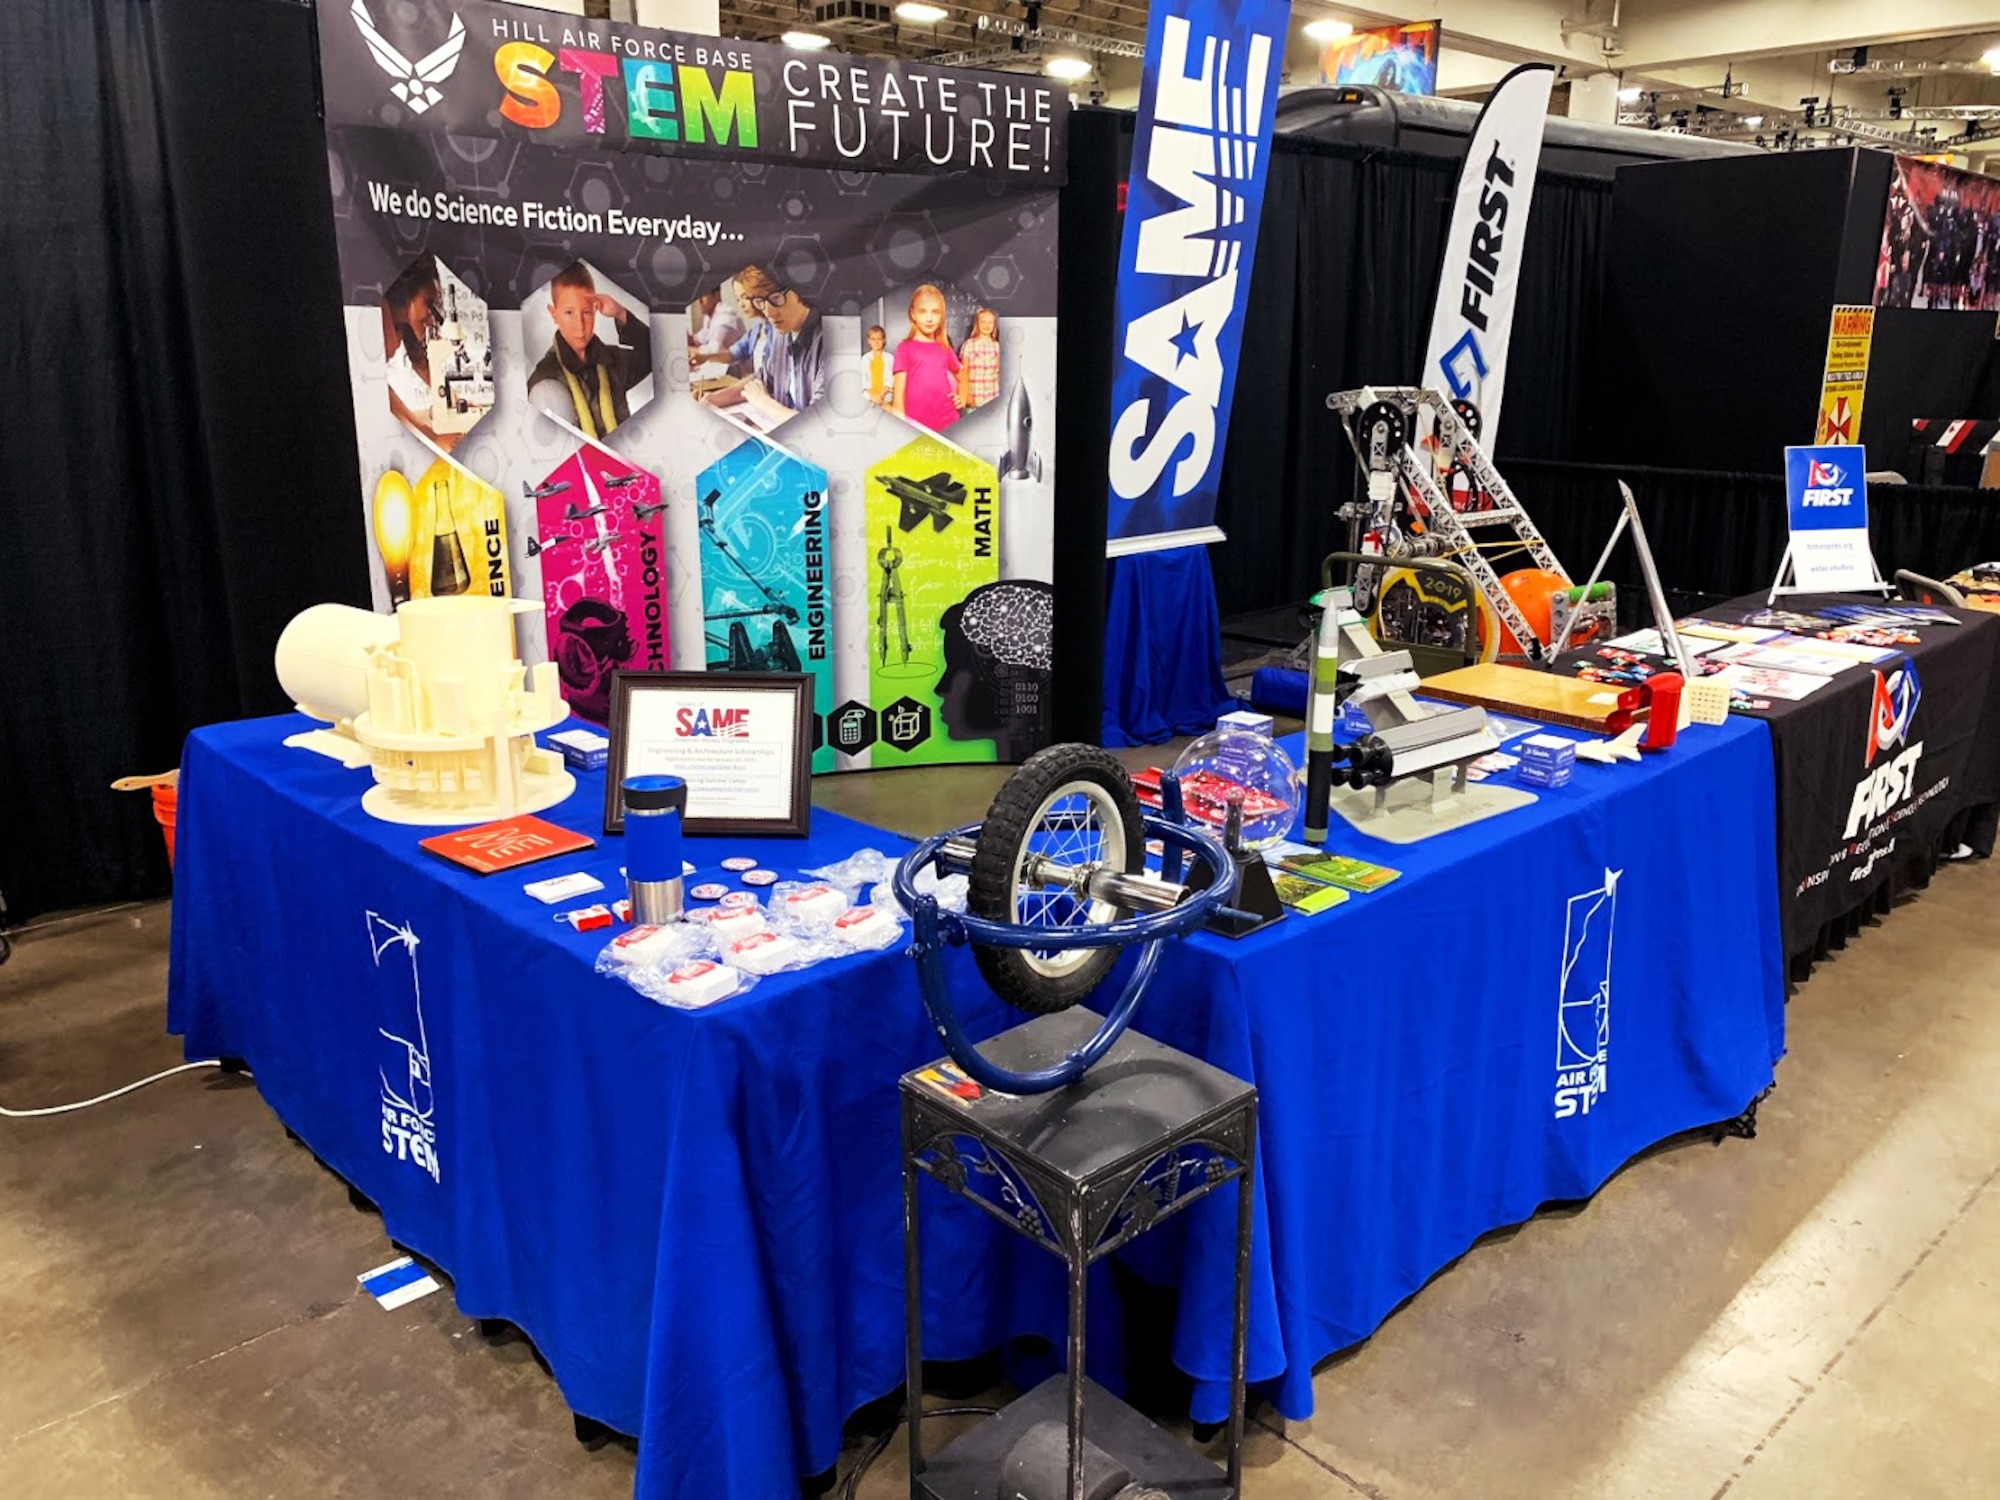 The Hill Air Force Base Science, Technology, Engineering and Math Outreach Program recently teamed with the Utah Engineers Council to present a STEM exhibit at the 2019 FanX event in Salt Lake City.